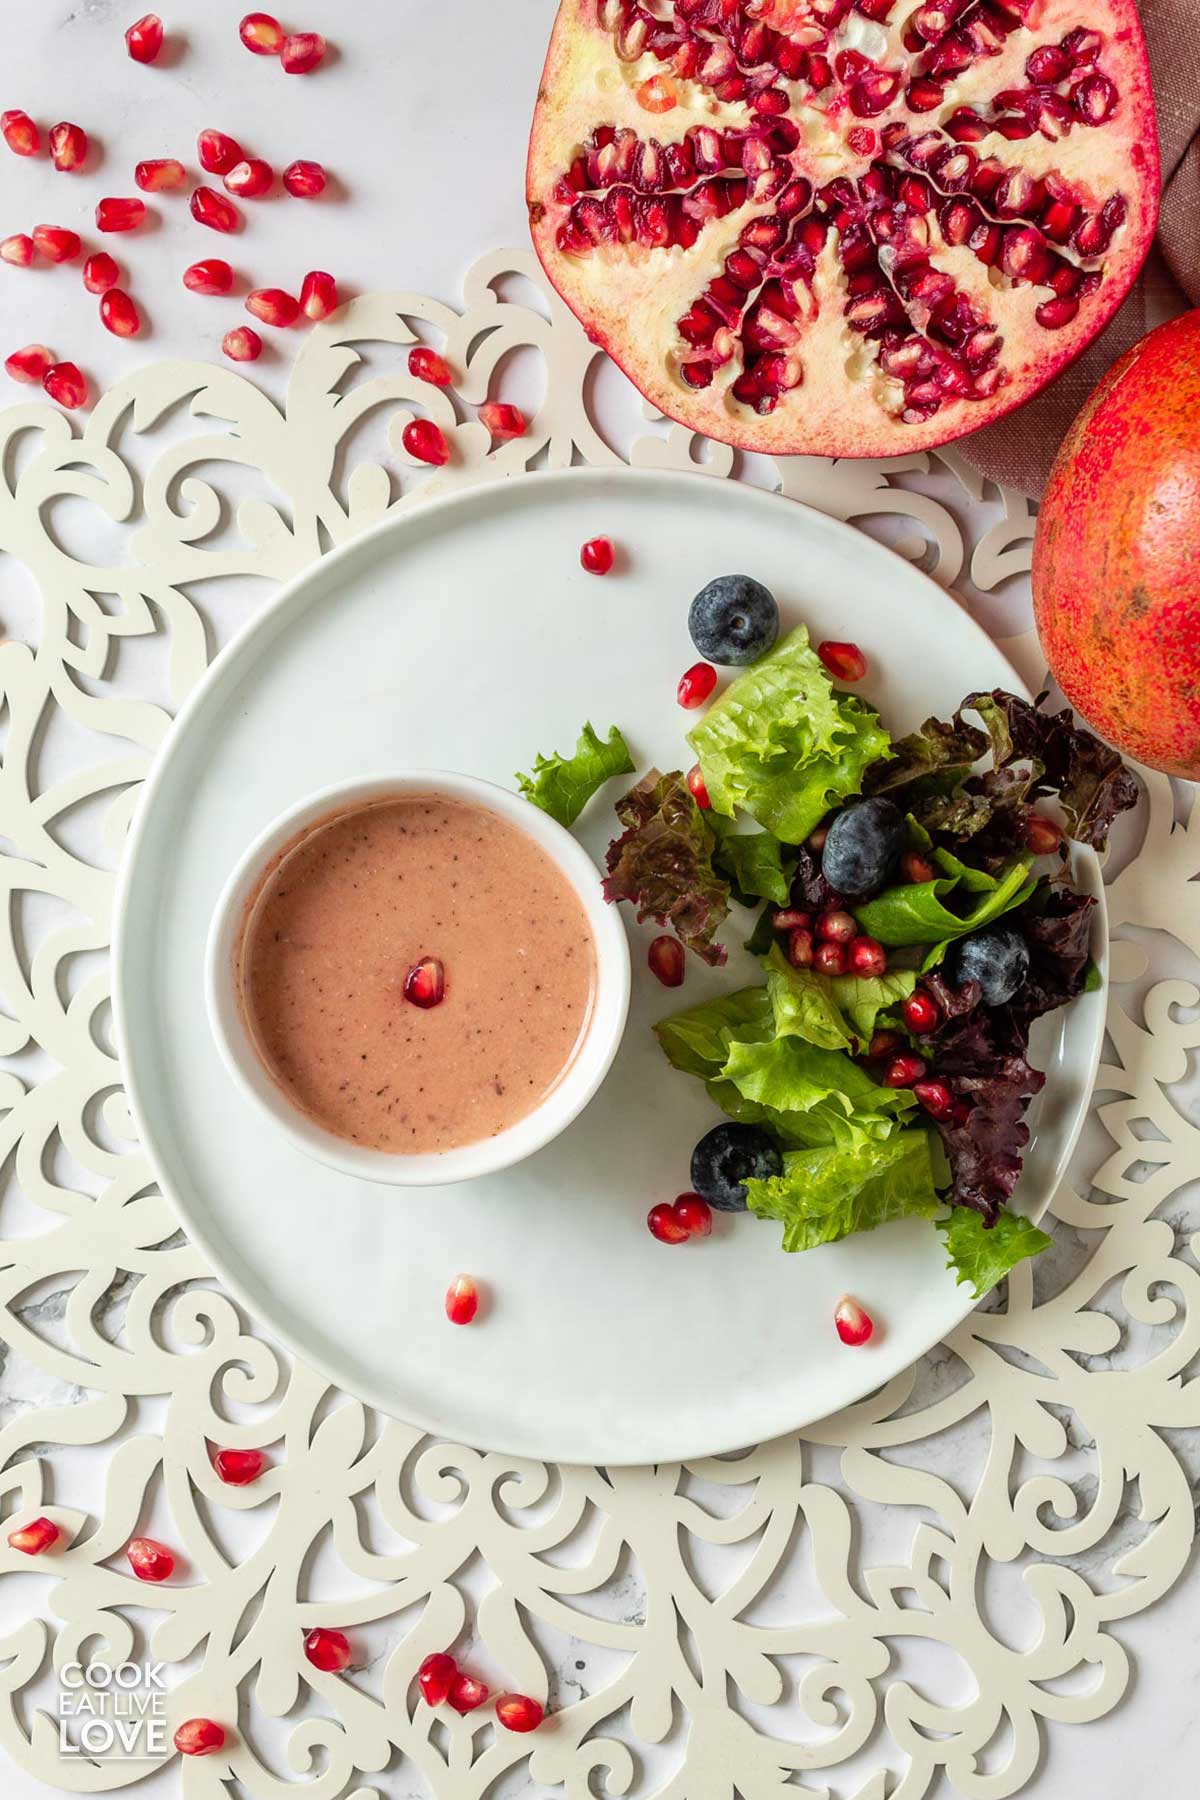 Pomegranate dressing on a plate with salad and a half a pomegranate on the table.